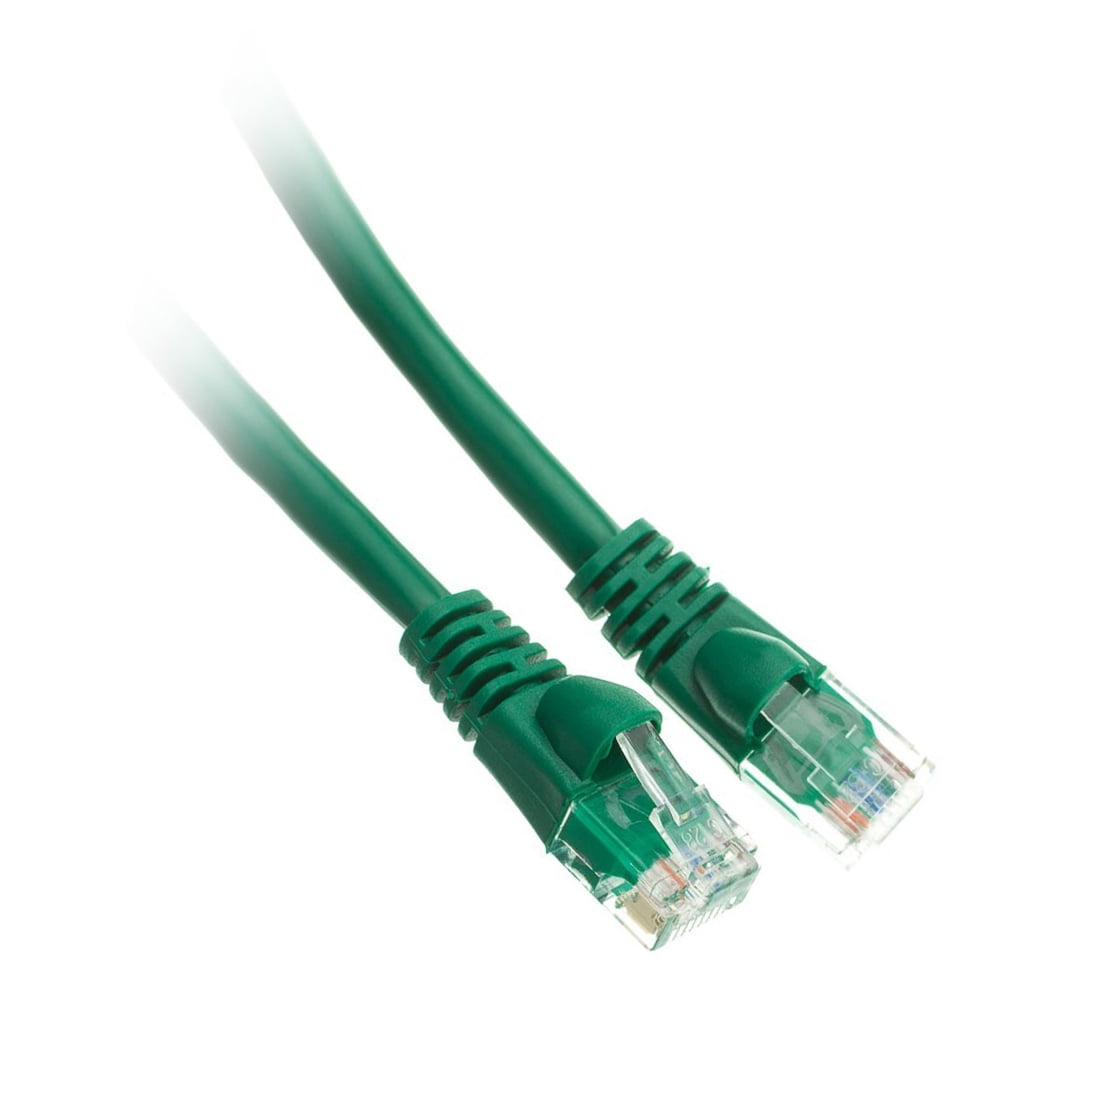 Green 10 foot CAT5e Network Patch Cable 